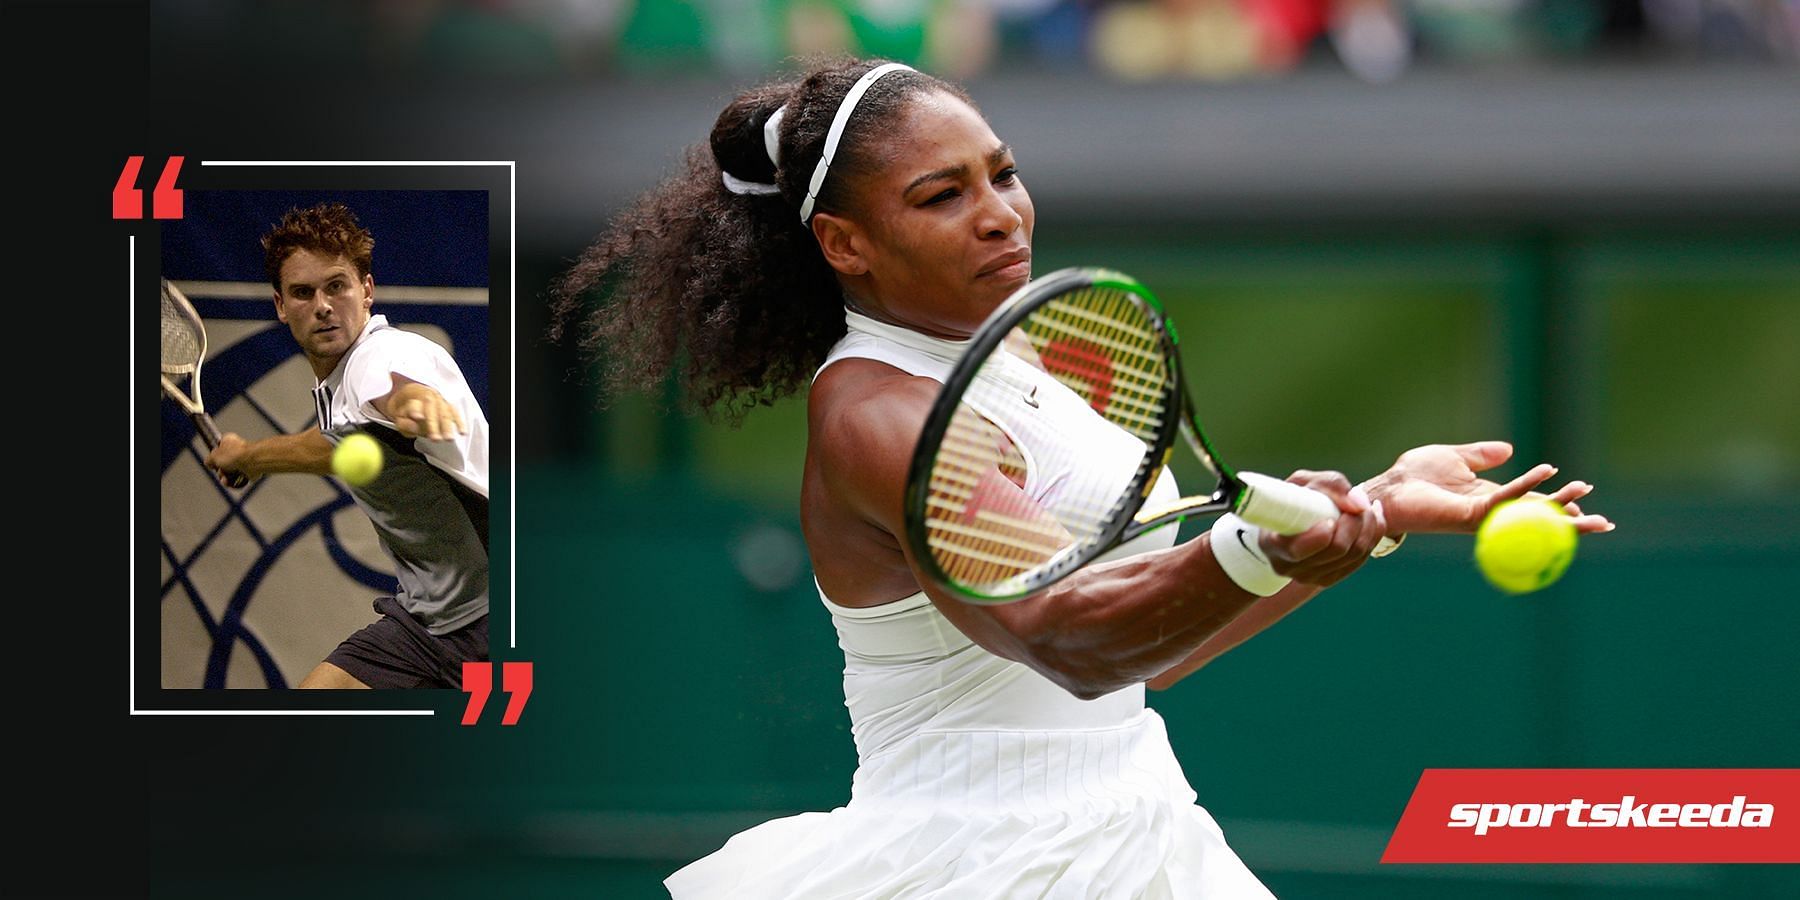 Jan Michael-Gambill speaks about Serena Williams&#039; performances in her comeback tournament